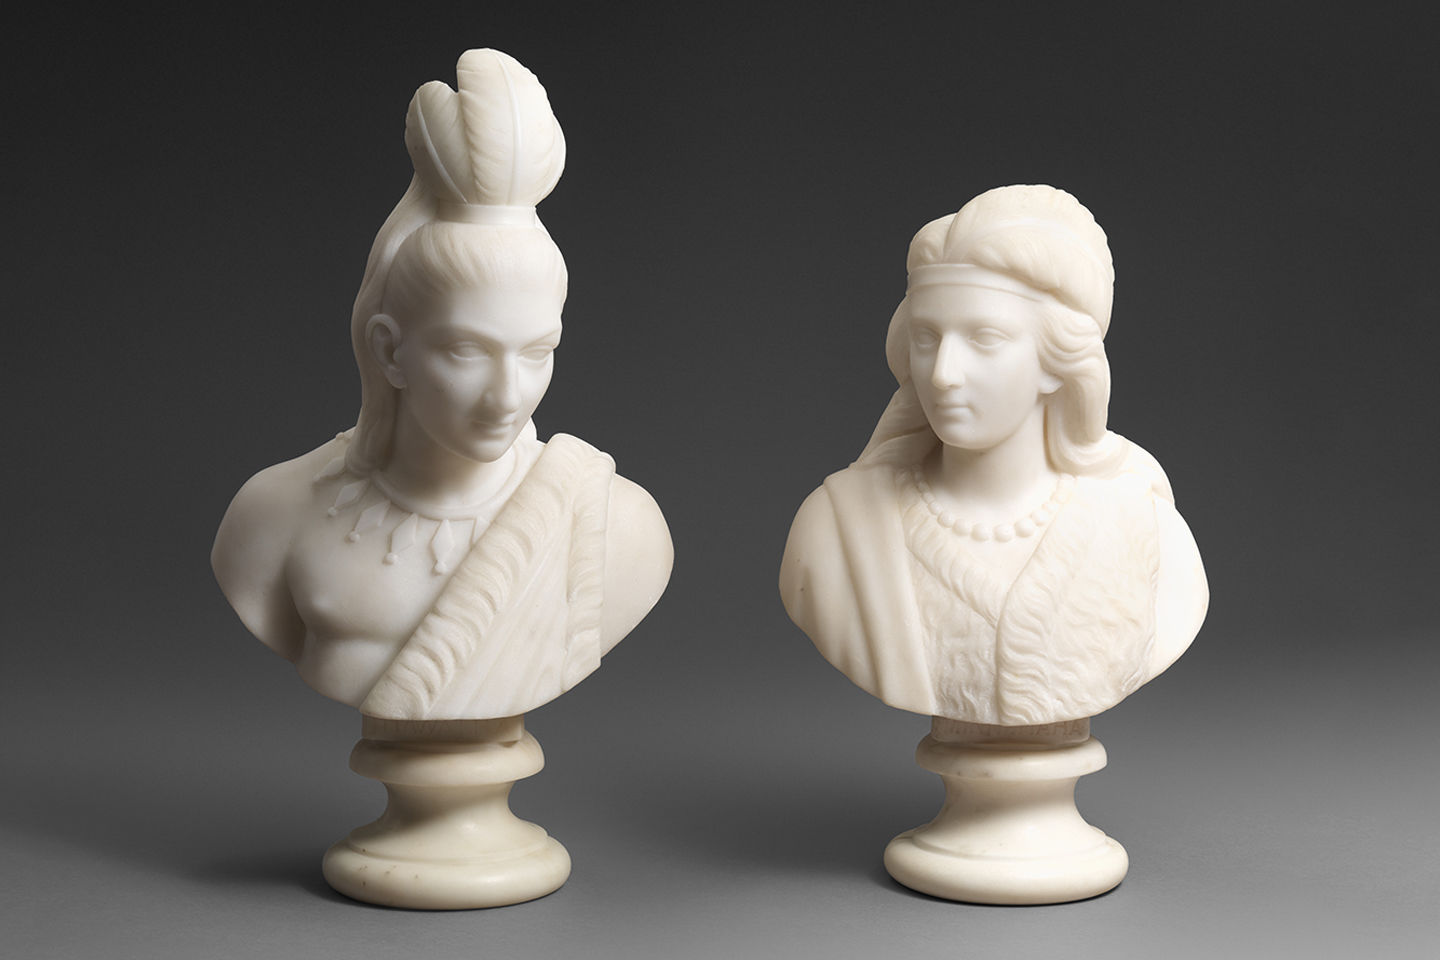 Two marble busts of Native American figures, Minnehaha and Hiawatha.